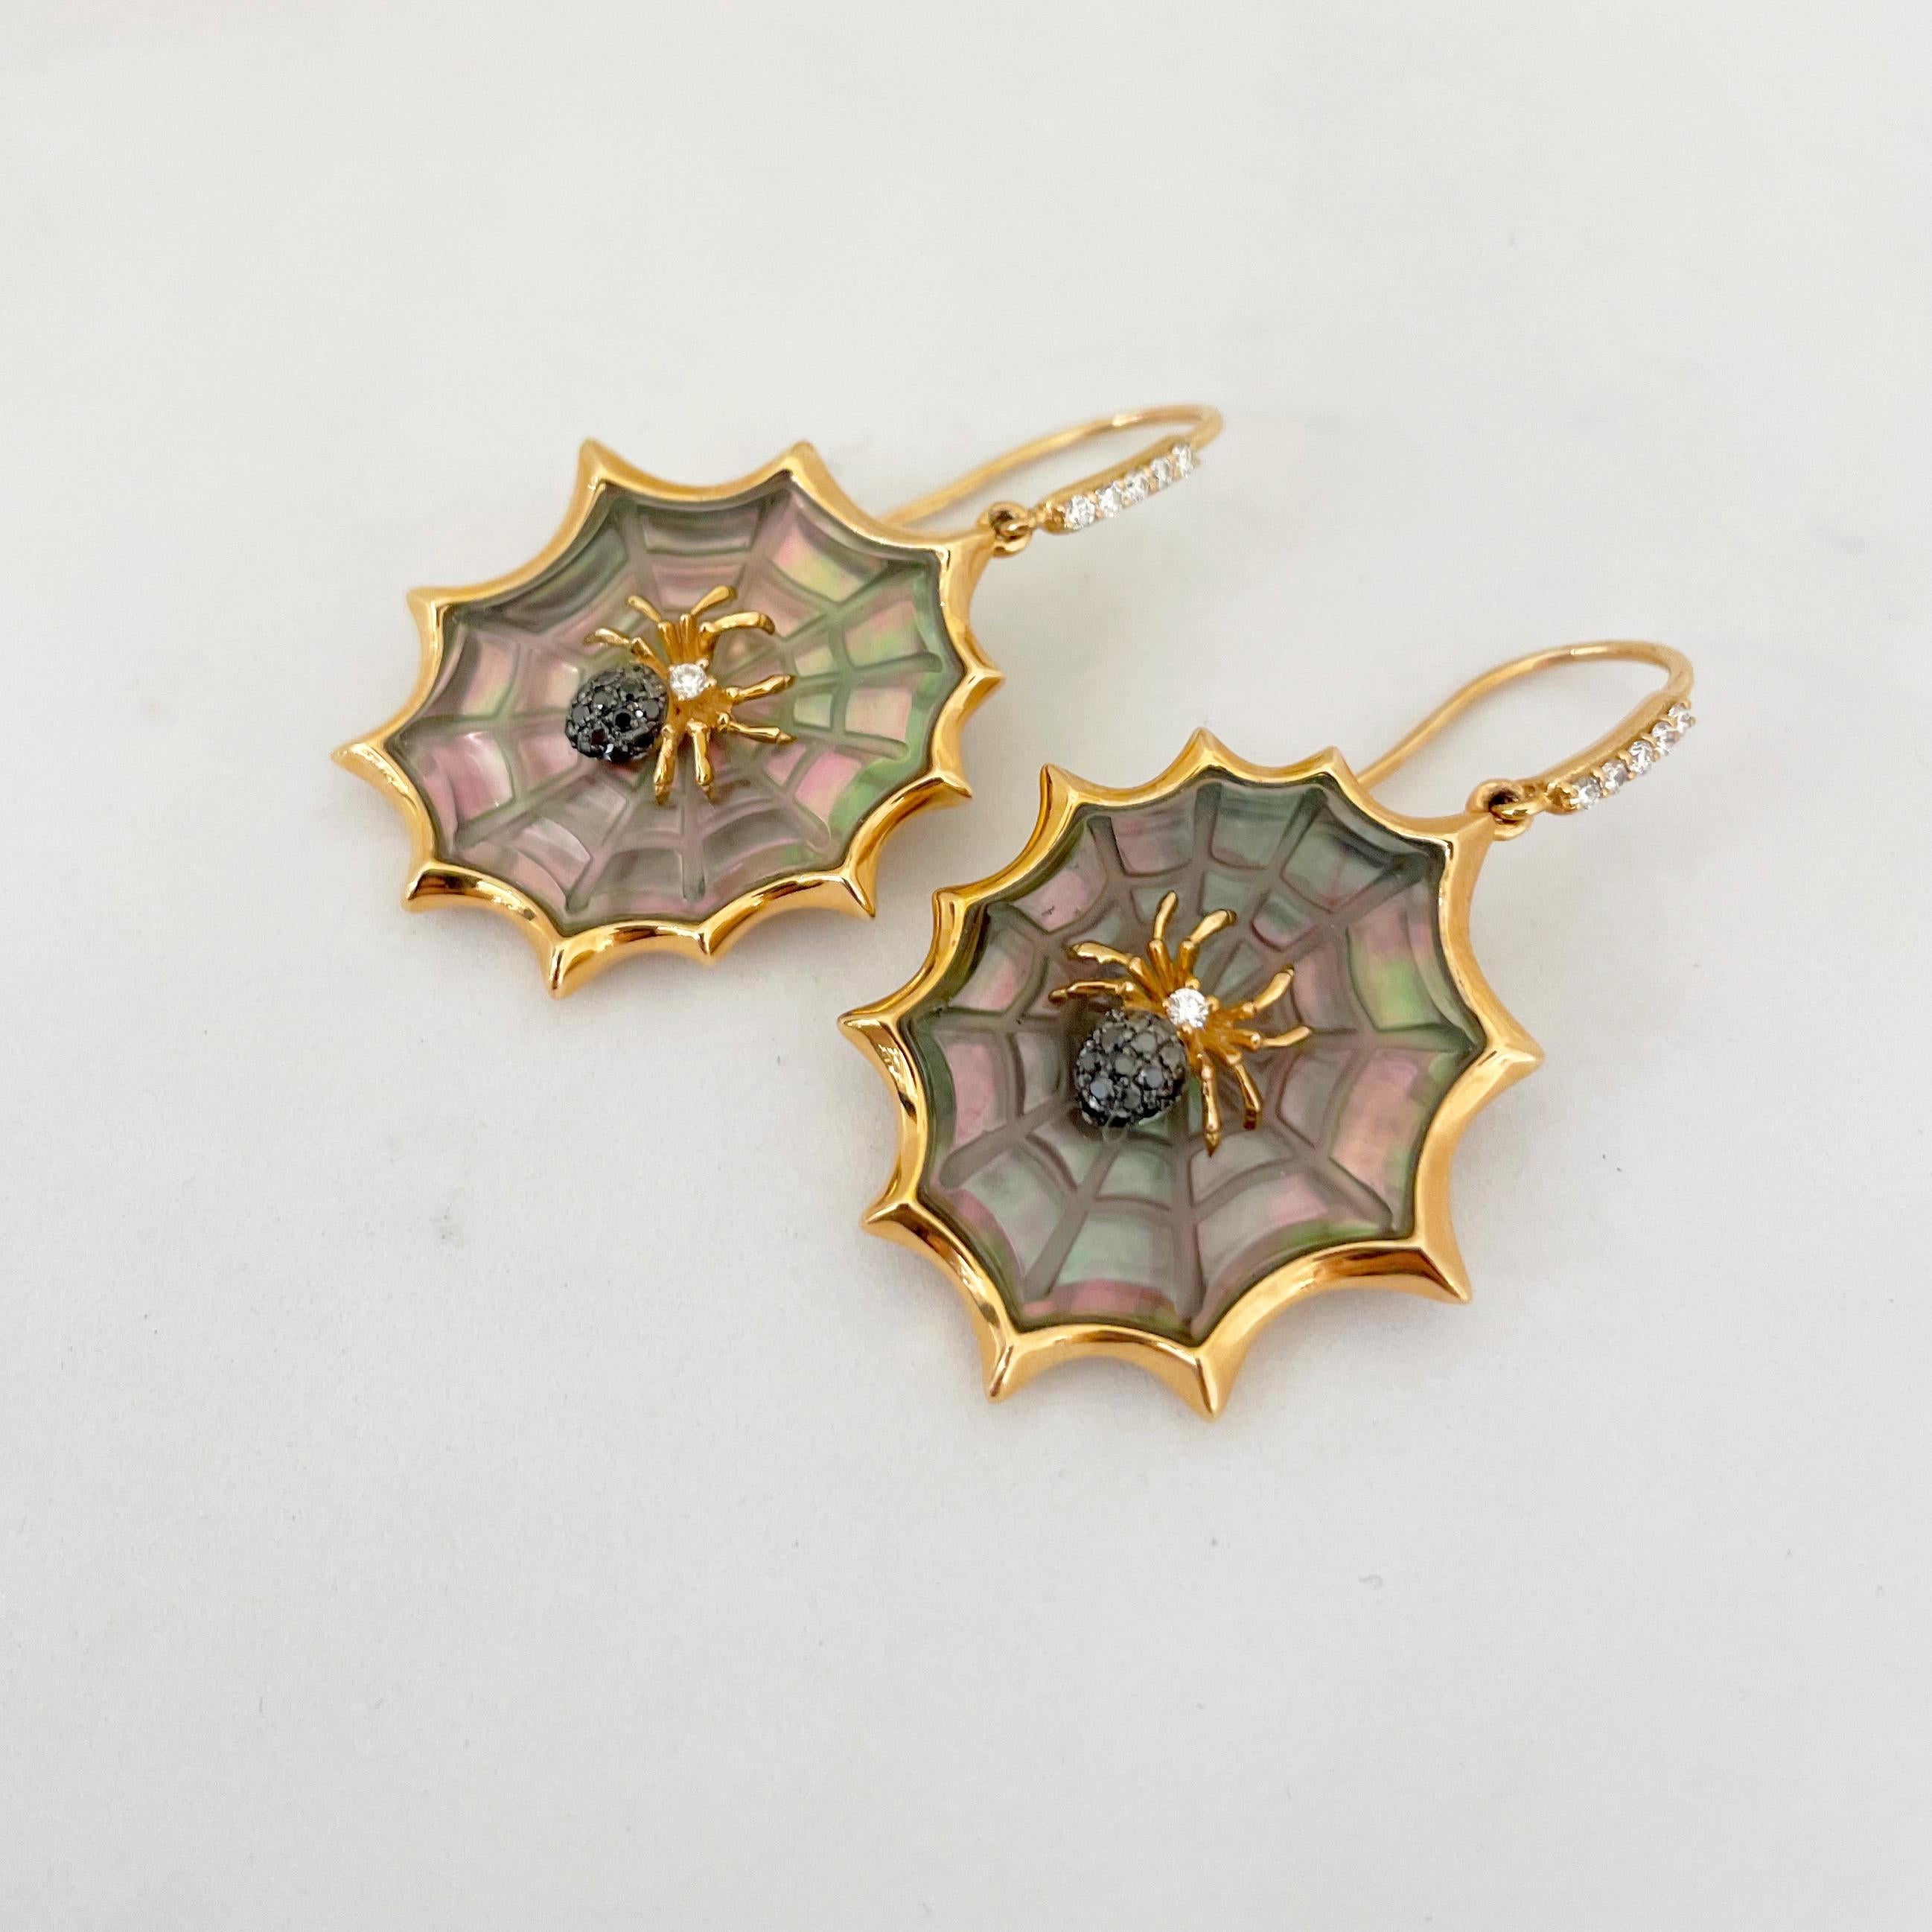 Artisan 18 Karat Rose Gold Spider Web Earrings with Black Mother of Pearl and Diamonds